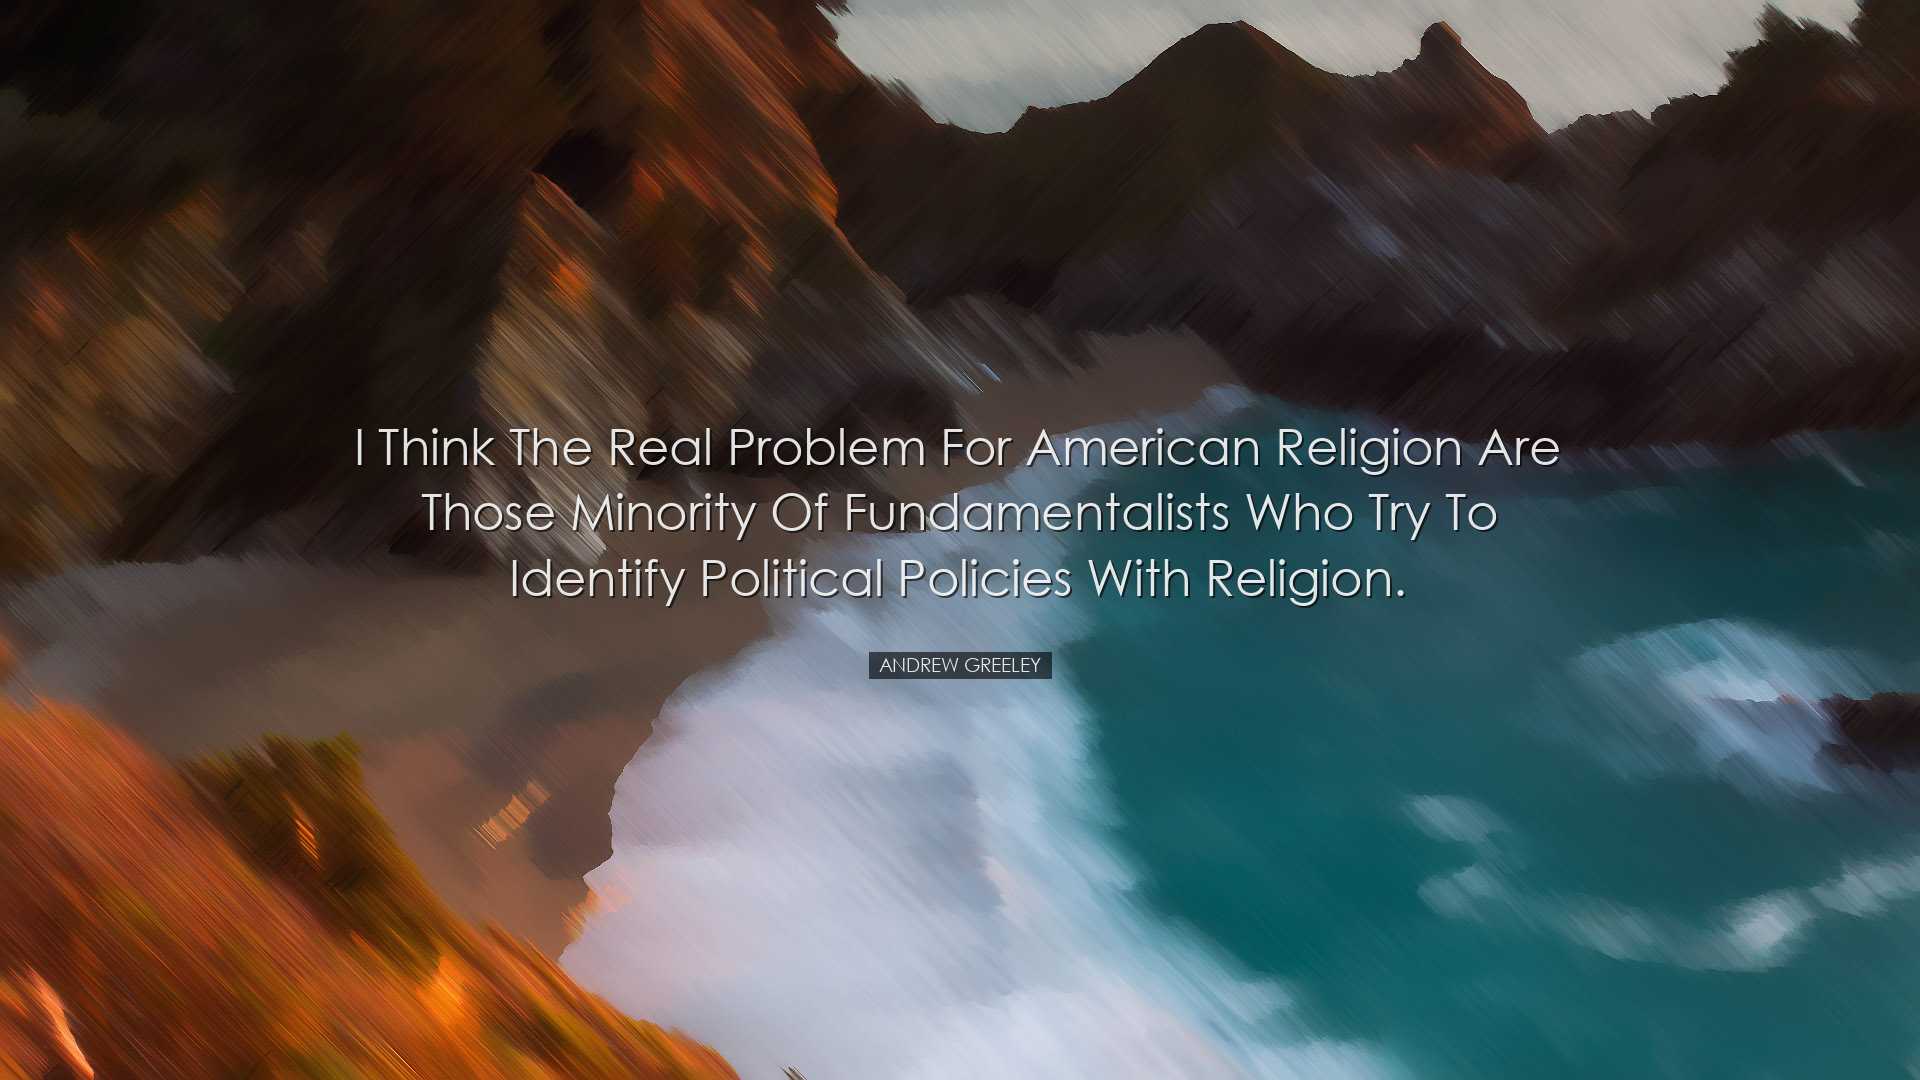 I think the real problem for American religion are those minority